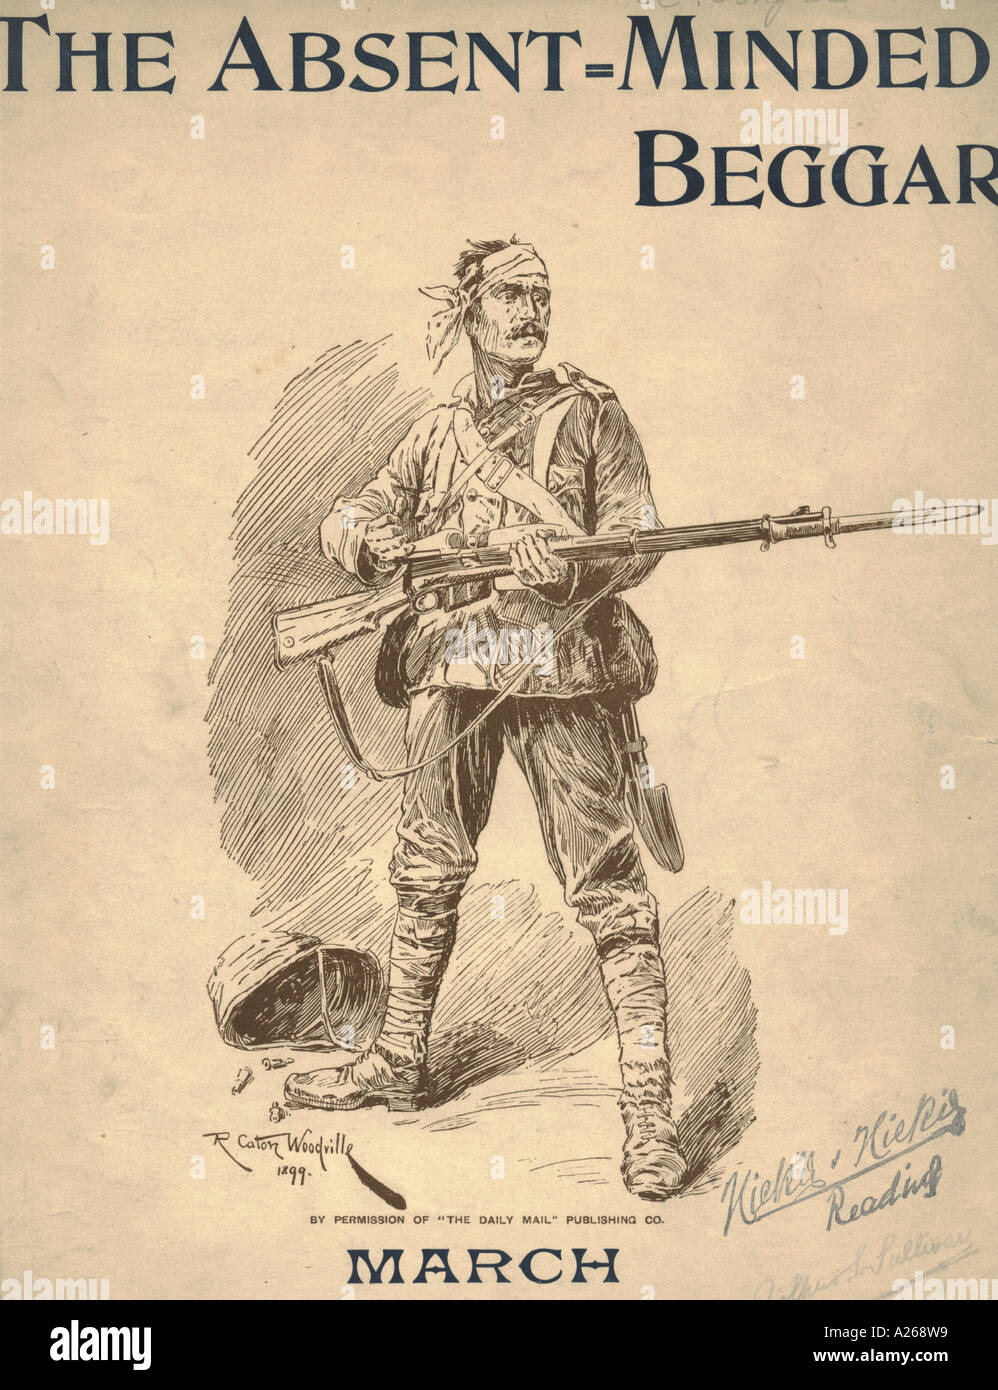 Sheet music cover The Absent-Minded Beggar circa 1899 Stock Photo